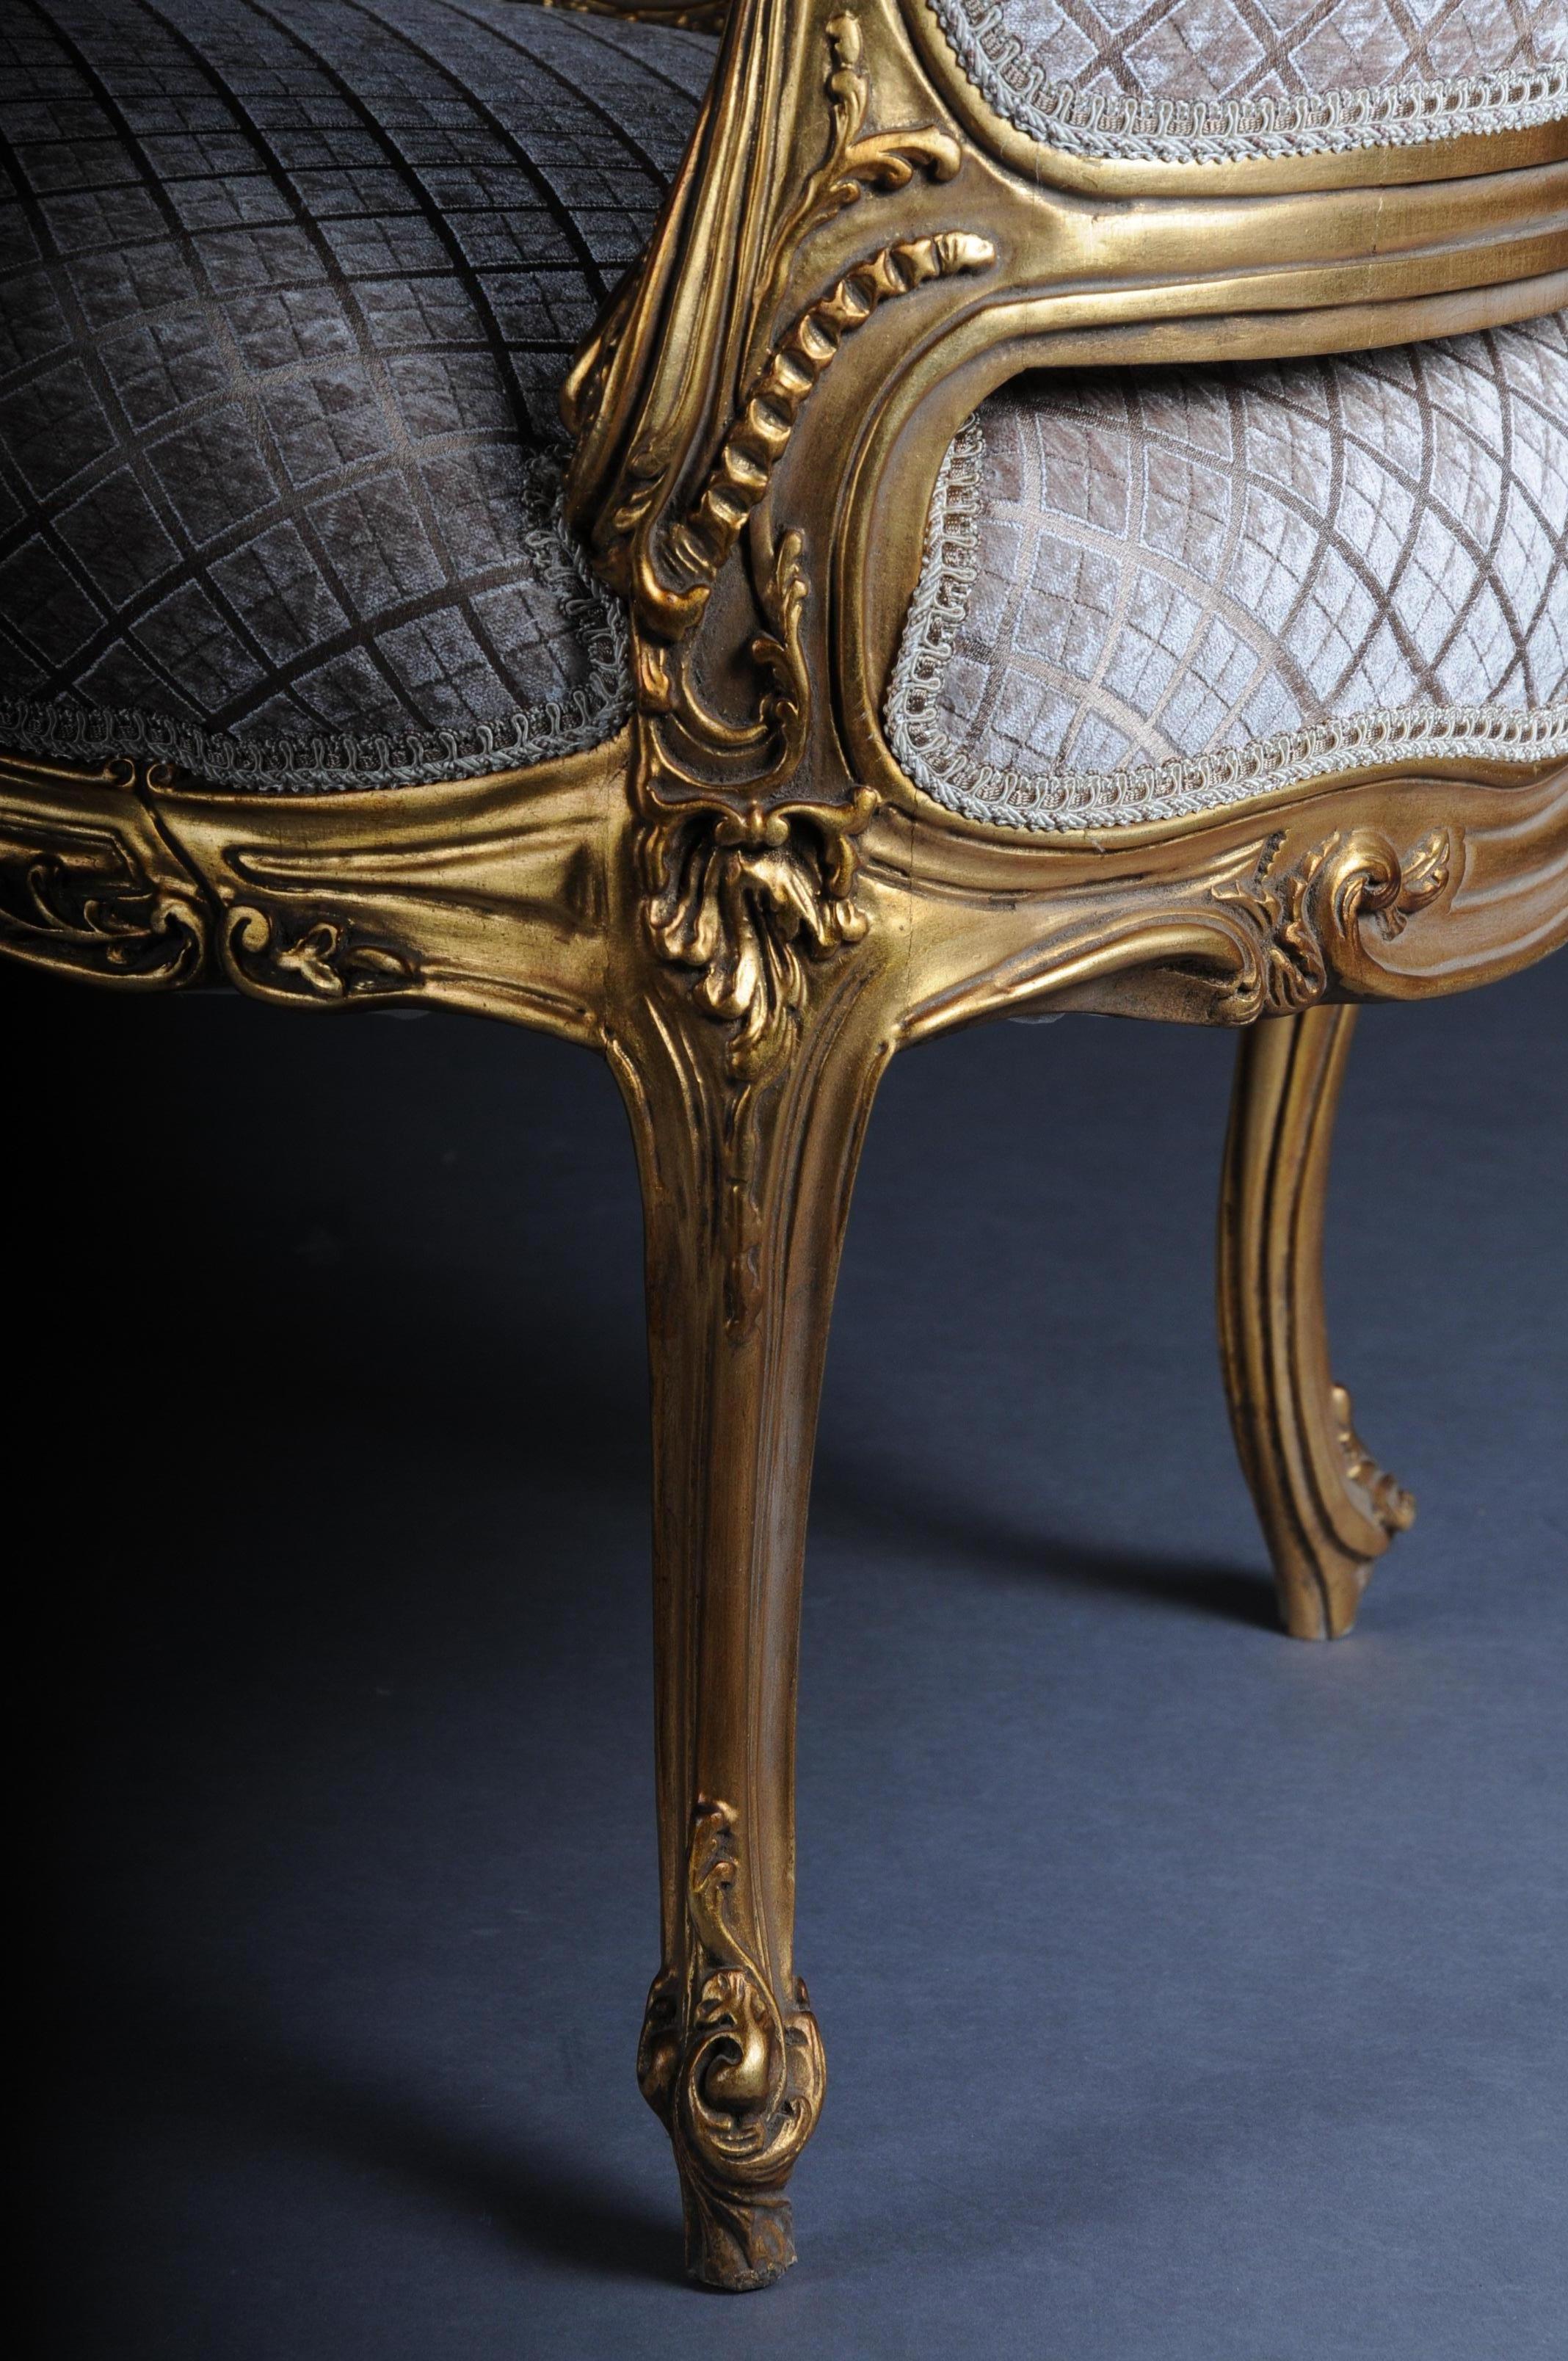 Luxurious Sofa, Canapé, Couch in Rococo or Louis XV Style (20. Jahrhundert)